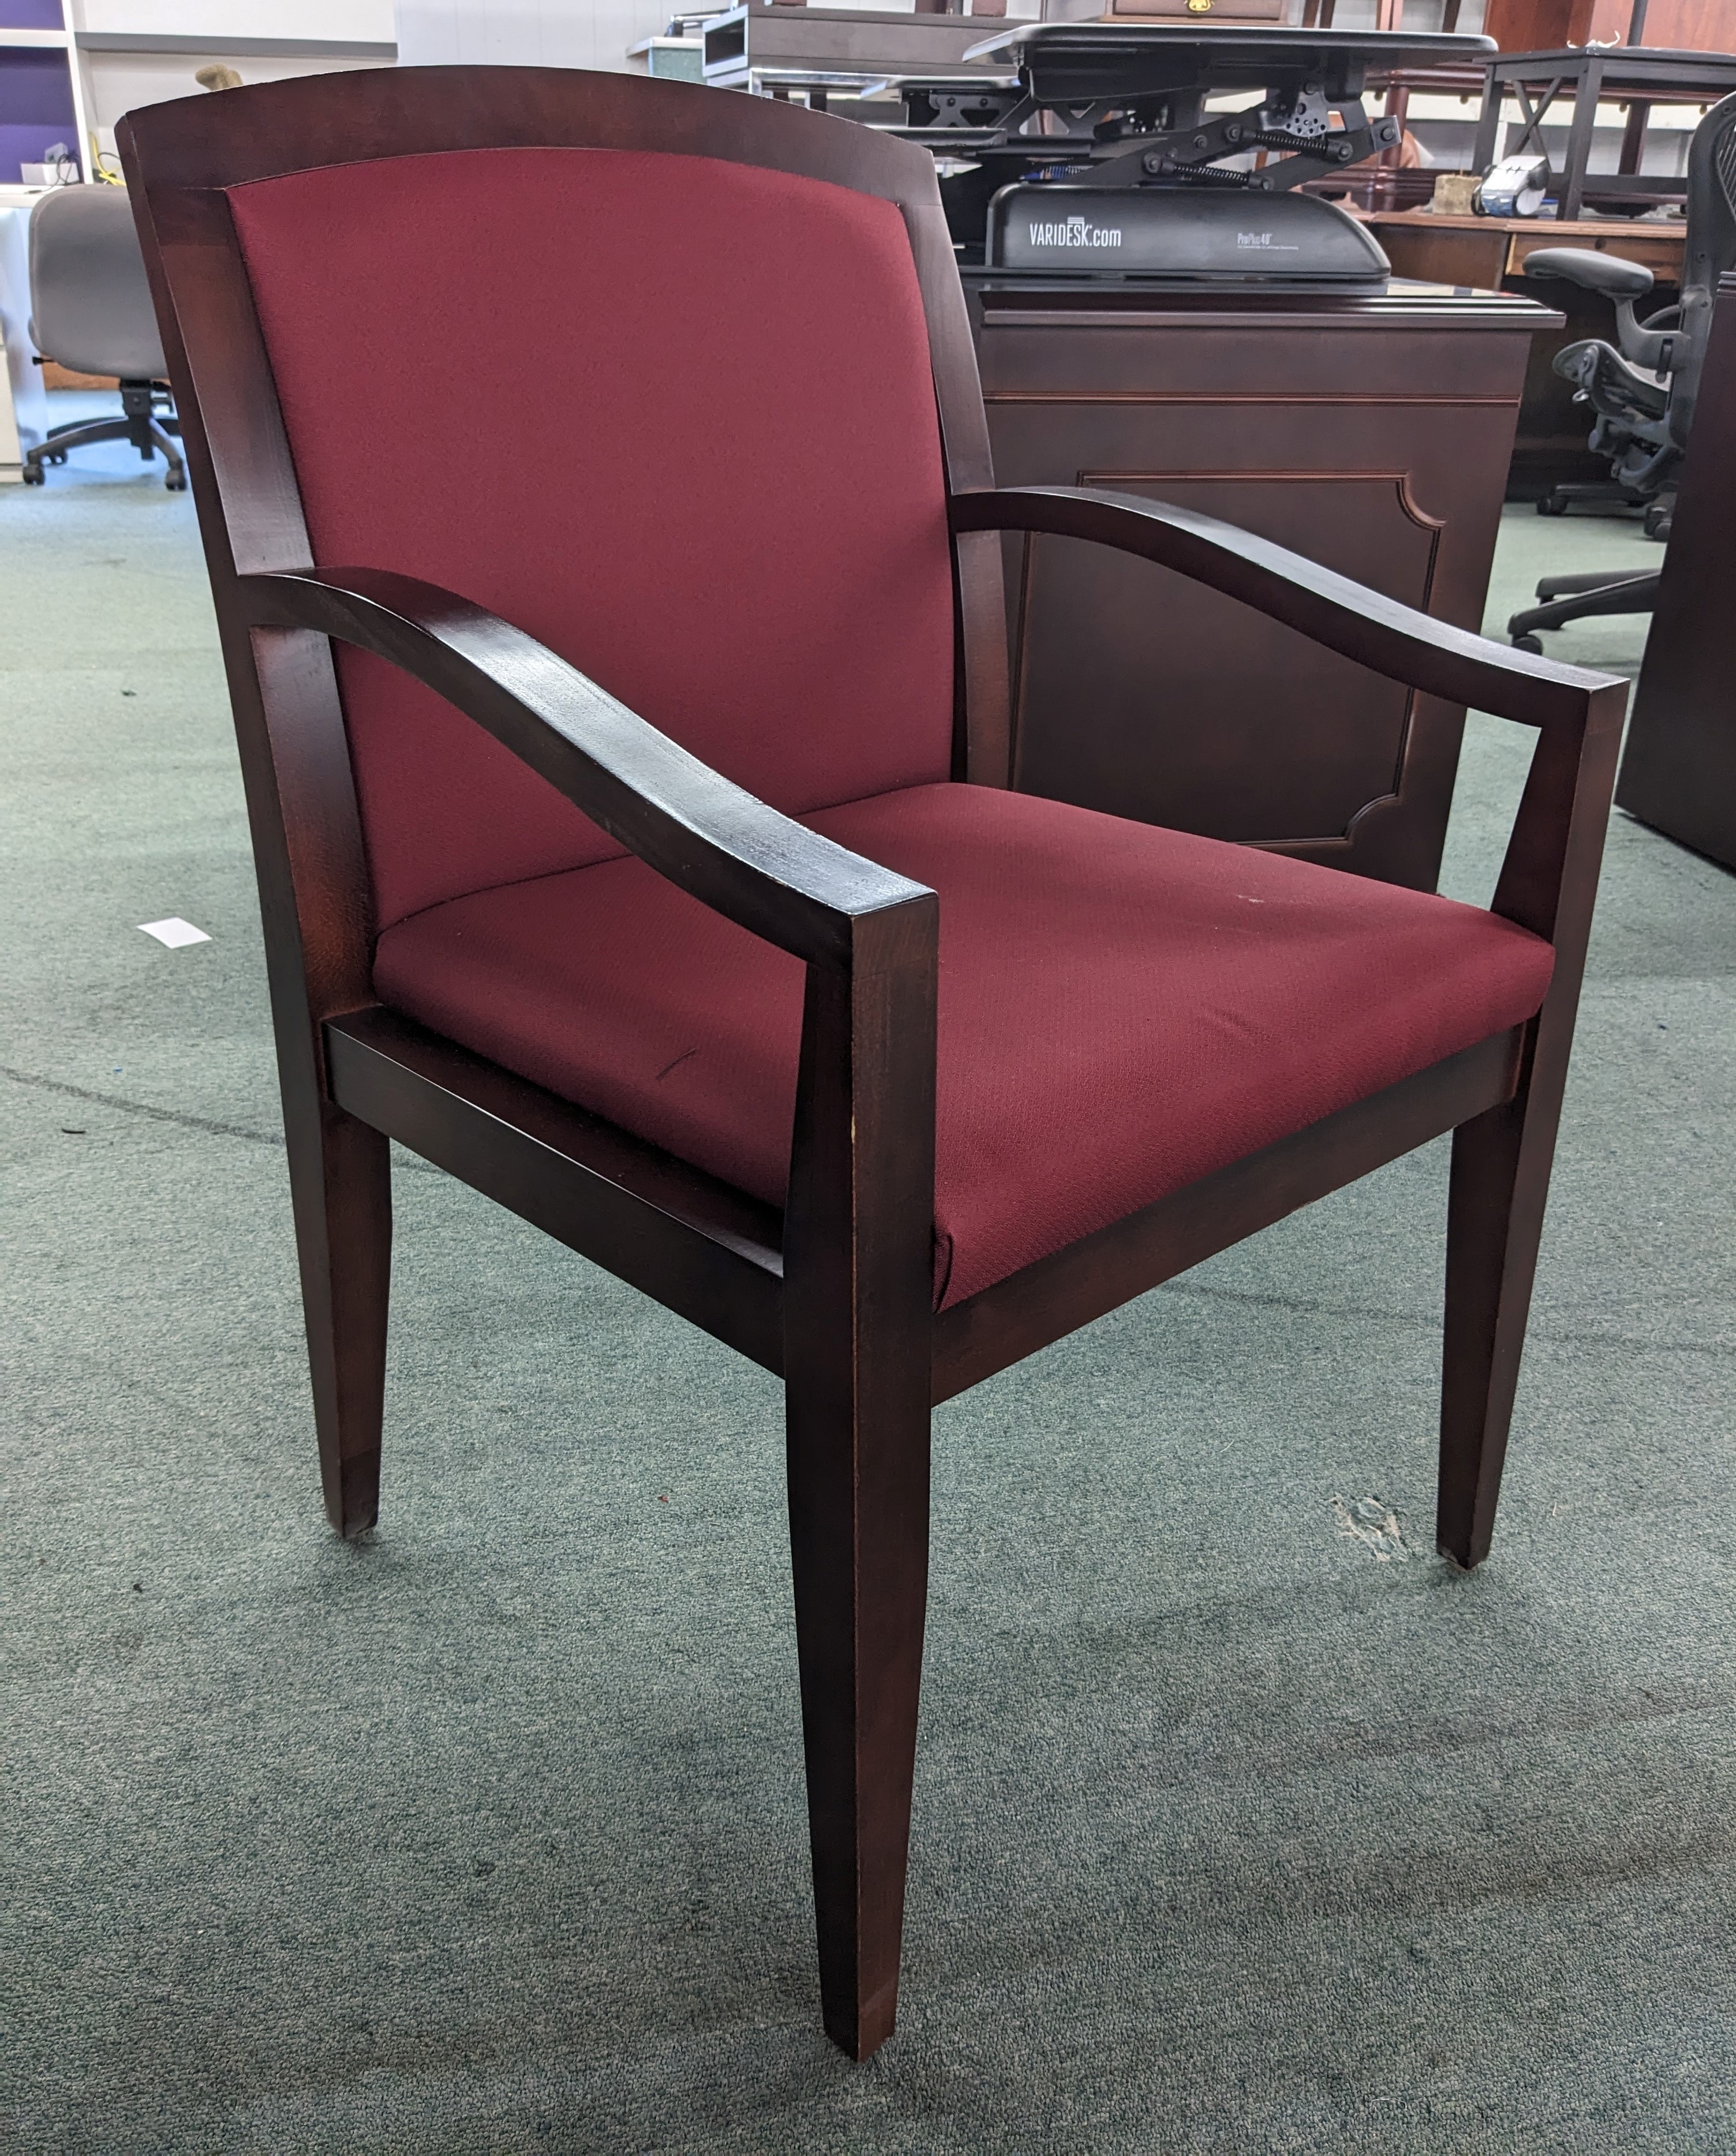 Used Guest Chairs, Burgundy